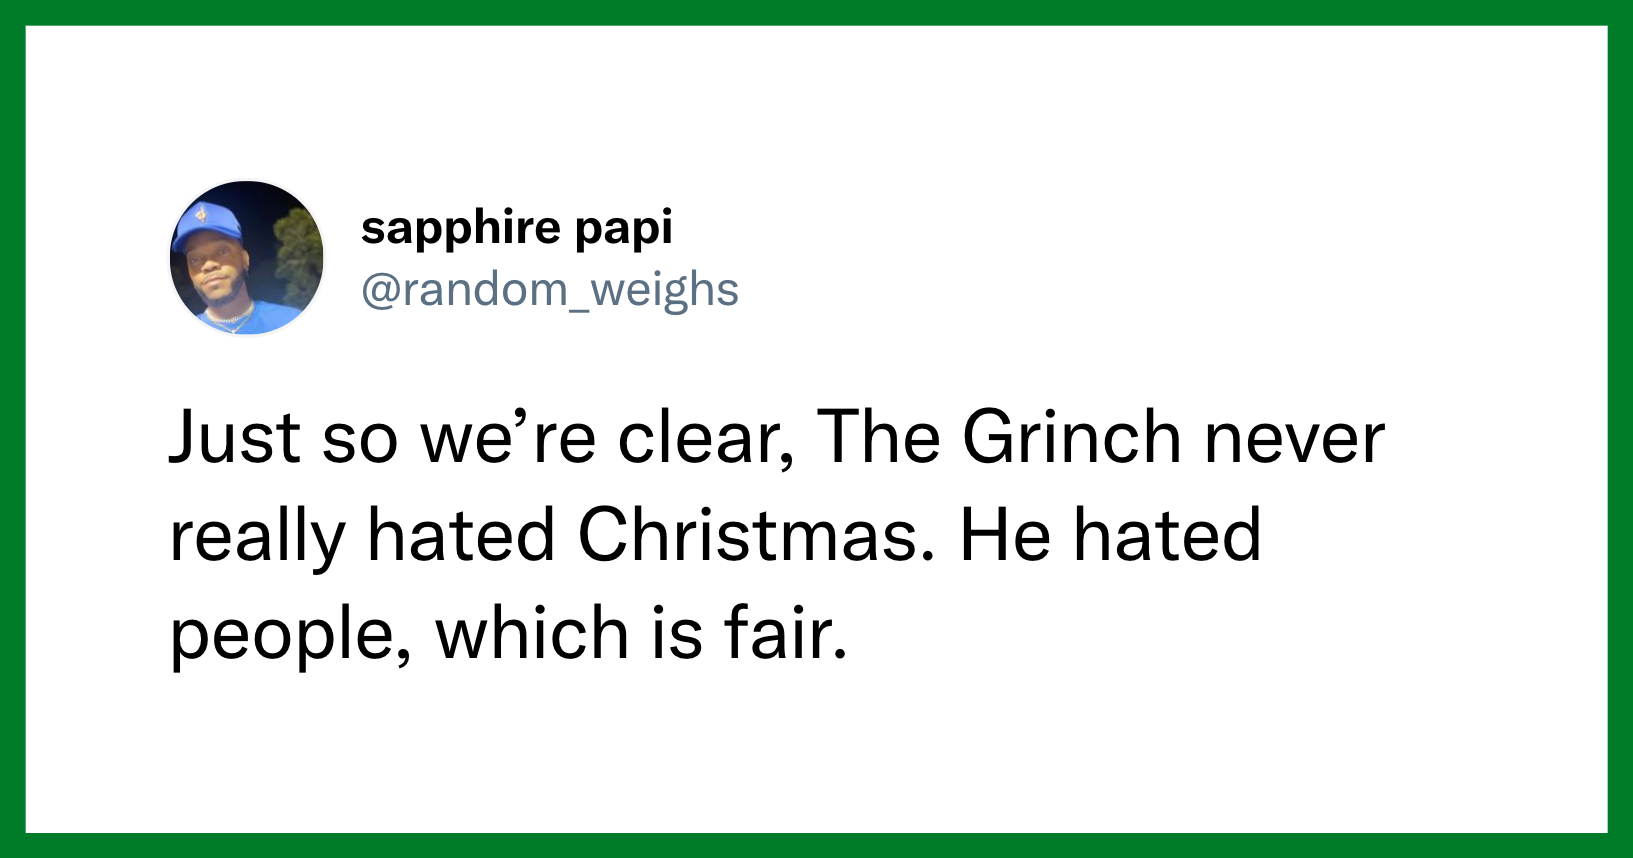 Just so we’re clear, The Grinch never really hated Christmas. He hated people, which is fair.